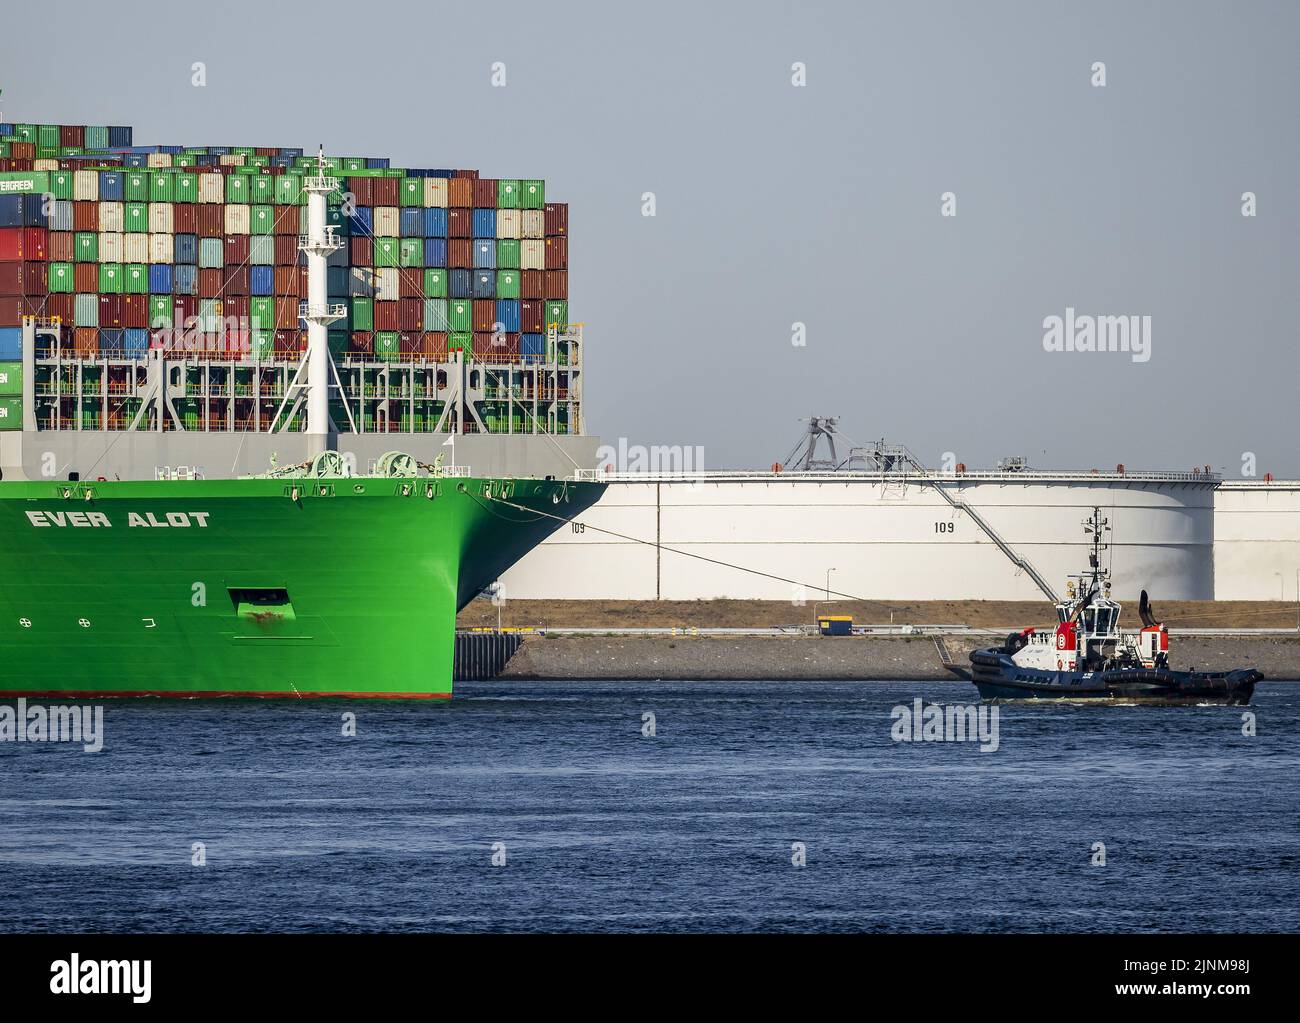 Rotterdam, Netherlands. 12th Aug, 2022. 2022-08-12 18:31:52 ROTTERDAM - The Ever Alot arrives in the port of Rotterdam. The largest container ship in the world is 400 meters long and 61.5 meters wide and sails for shipping company Evergreen. The vessel, which was only commissioned this year, can carry just over 24,000 standard containers. ANP REMKO DE WAAL netherlands out - belgium out Credit: ANP/Alamy Live News Stock Photo